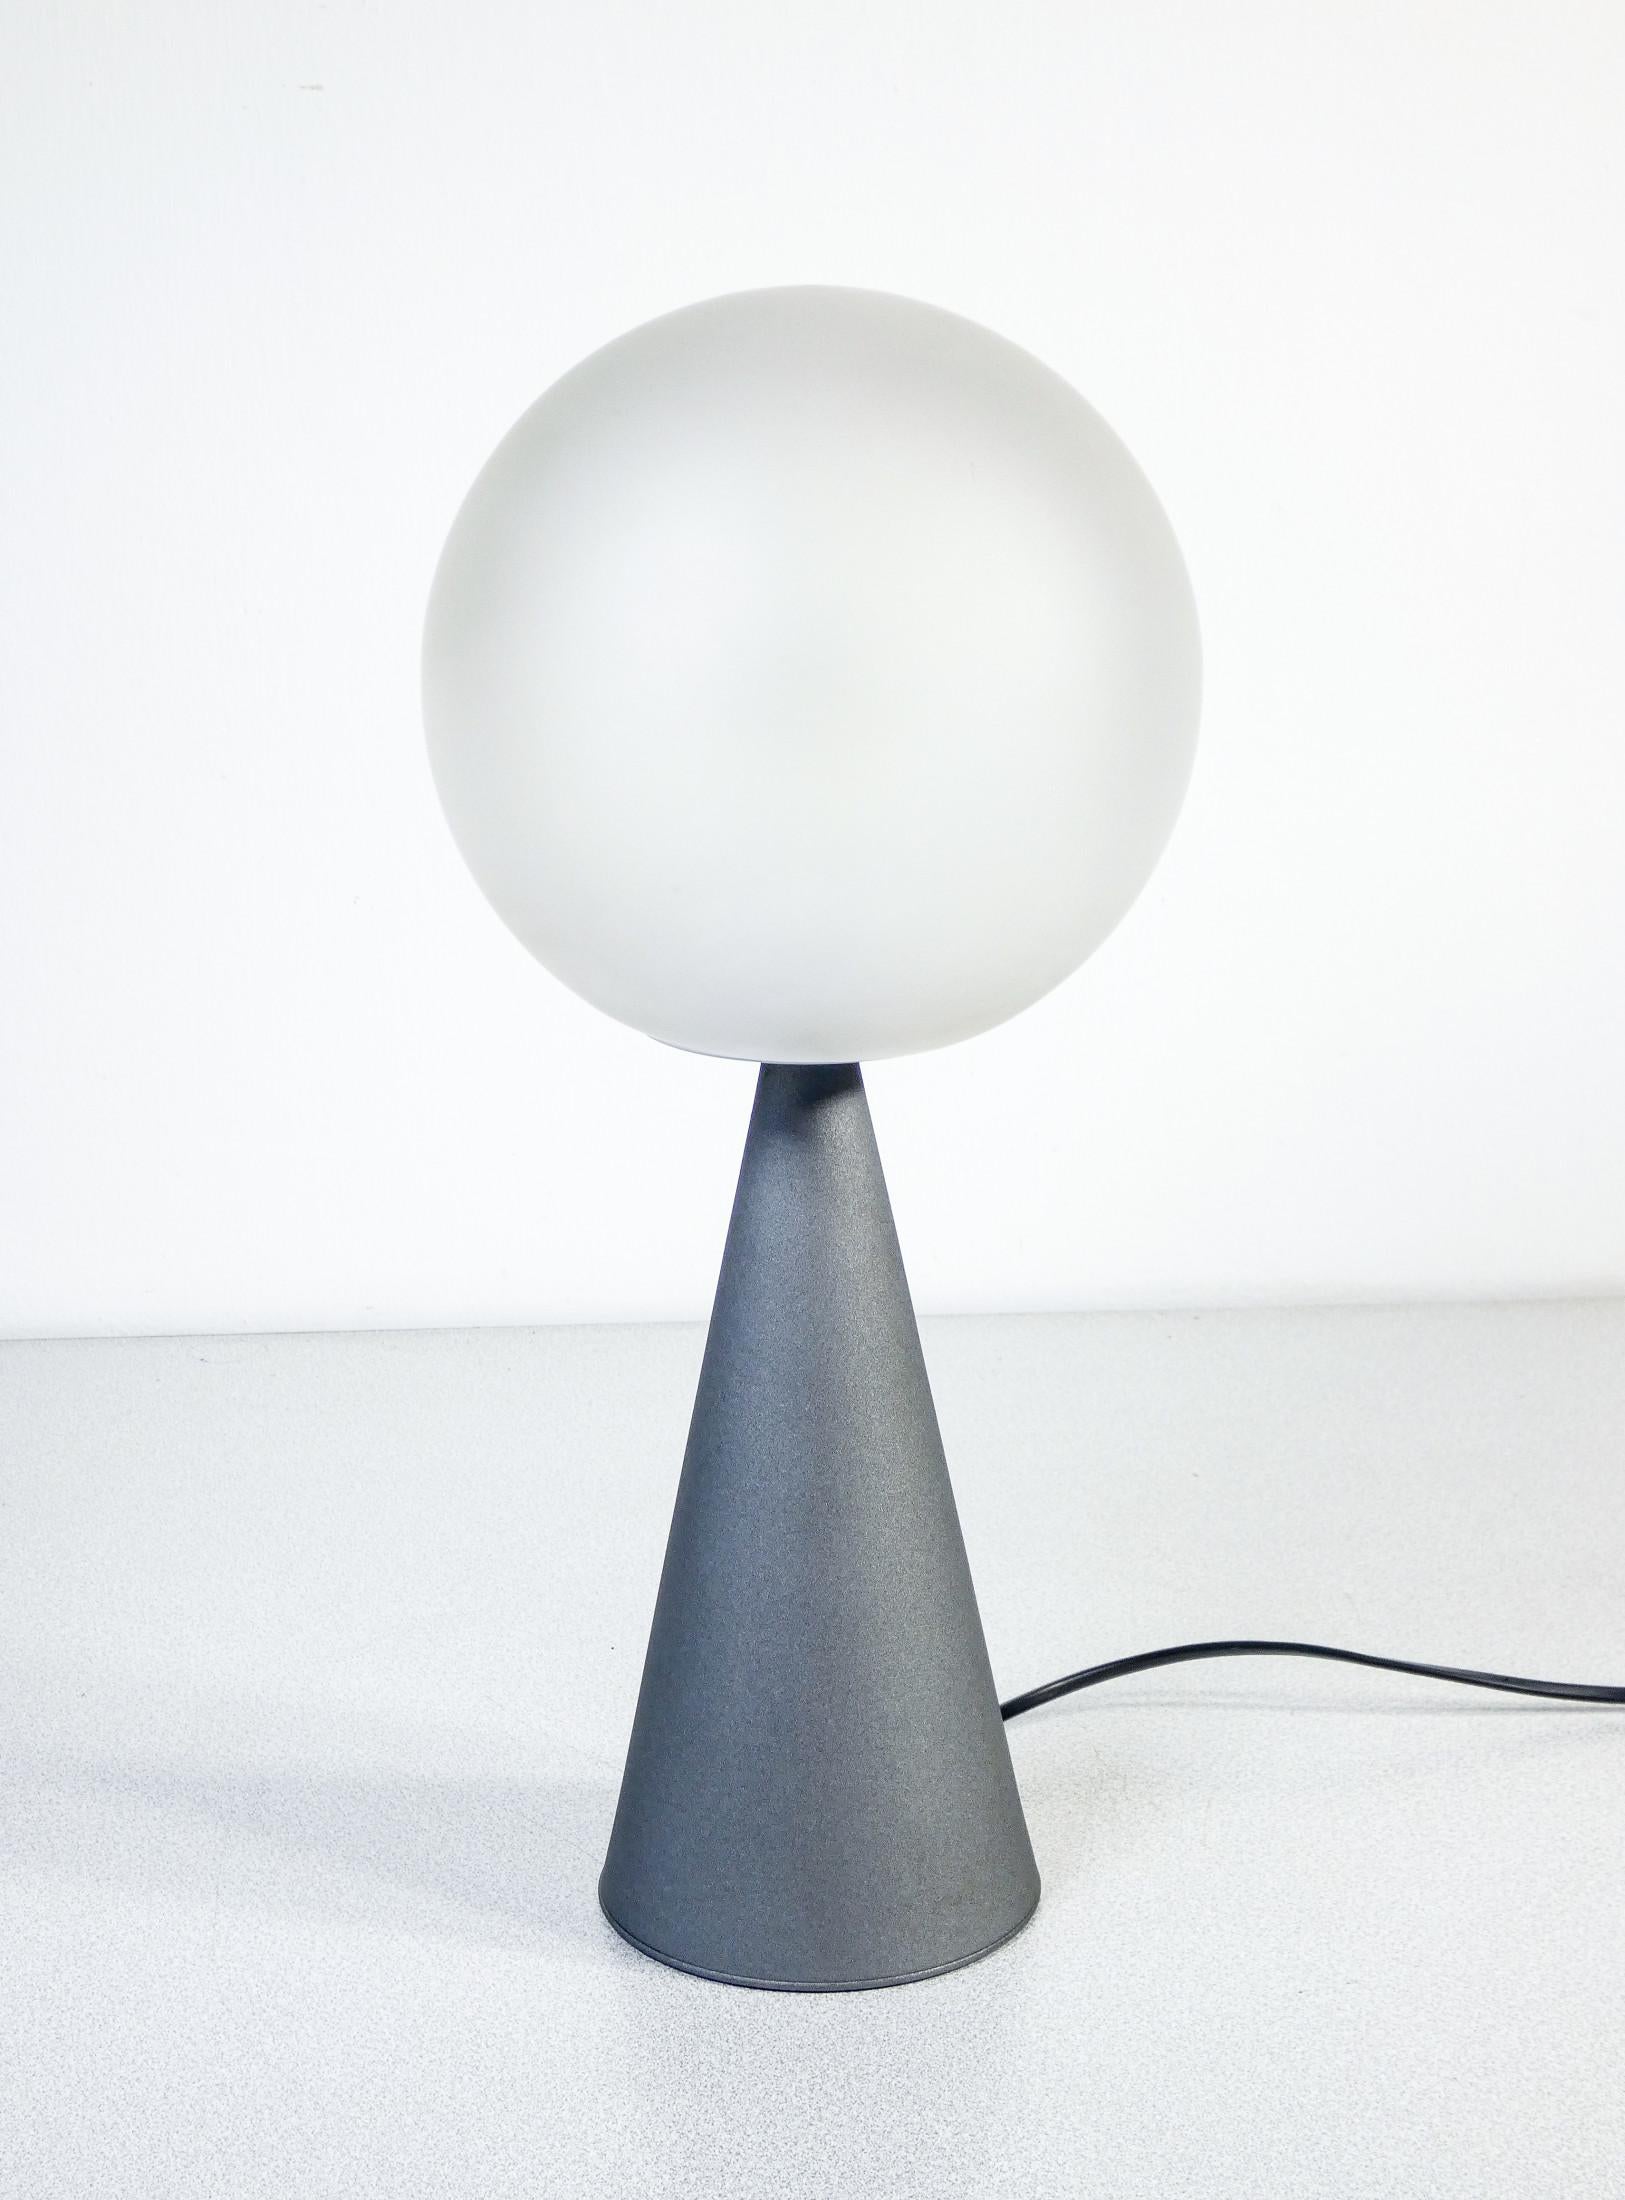 Table lamp
Bilia (mod. 2474)
design Giò PONTI
for FONTANA ARTE.

ORIGIN
Italy

PERIOD
Anni 60

DESIGNER
Gio PONTI
(1891-1979) was an influential Italian architect and designer, among the best known on the Italian and world stage. He graduated in